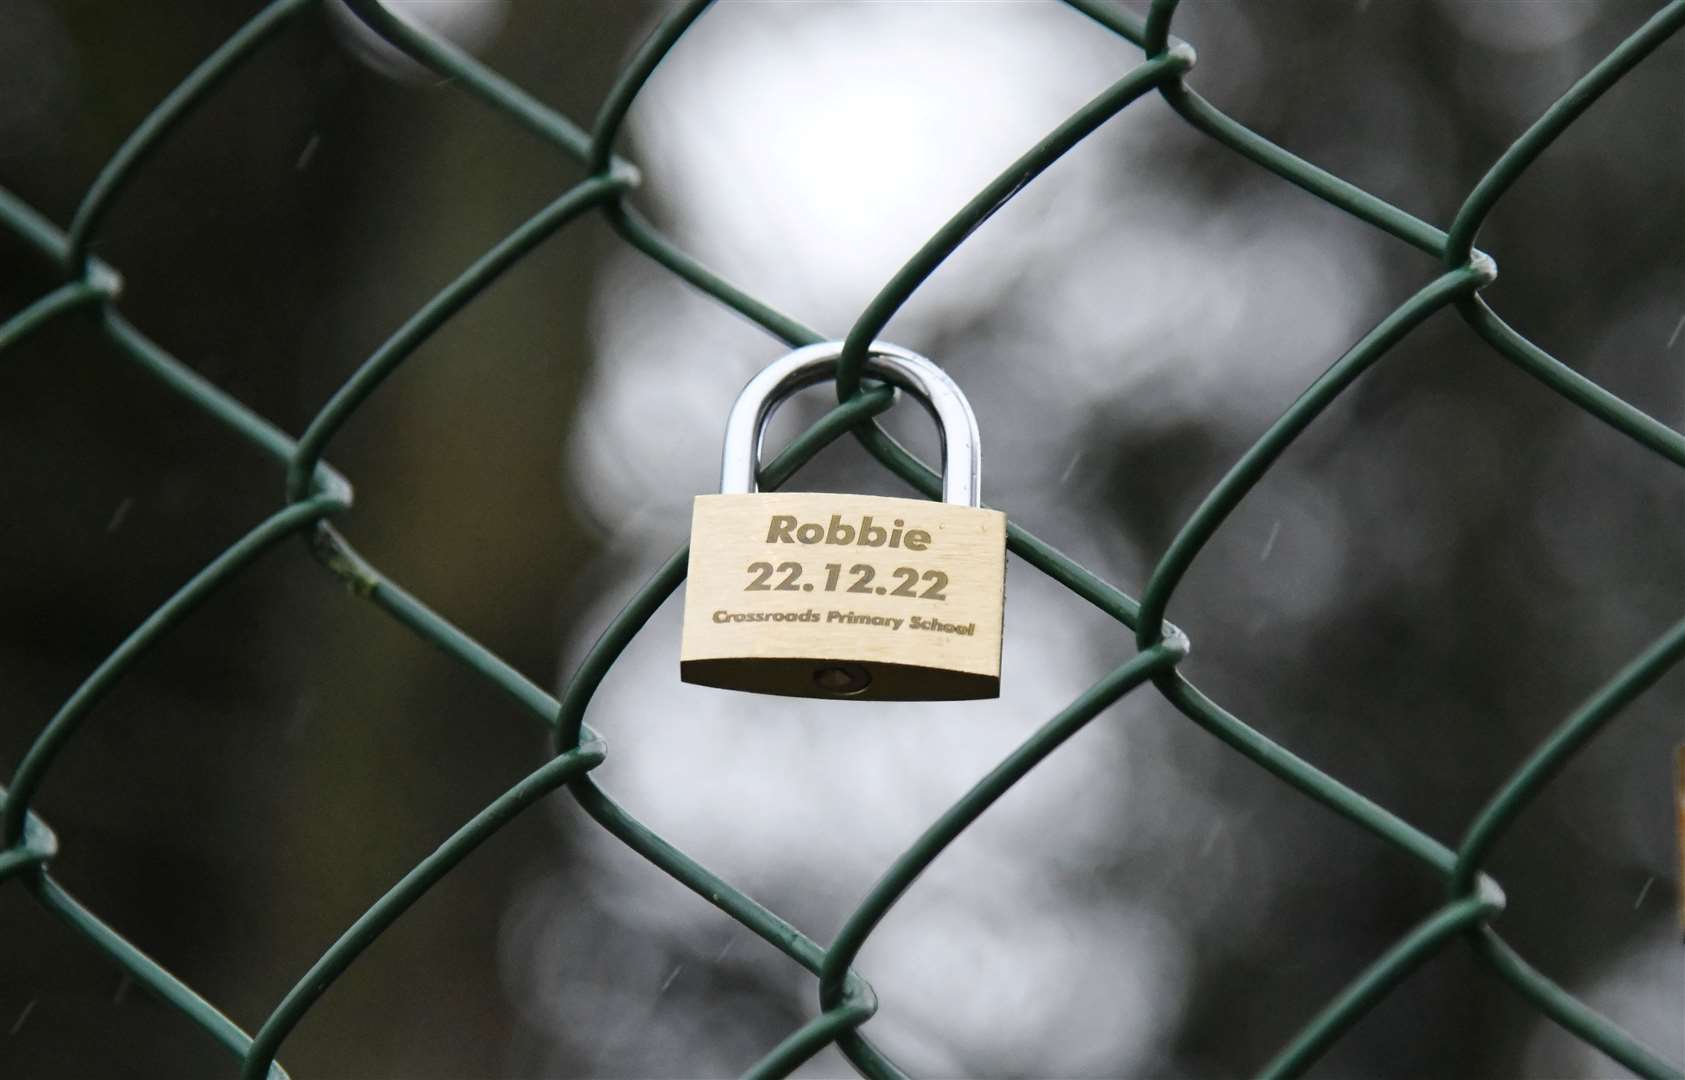 Robbie's padlock on the fence at Crossroads Primary School. ..Picture: Beth Taylor.